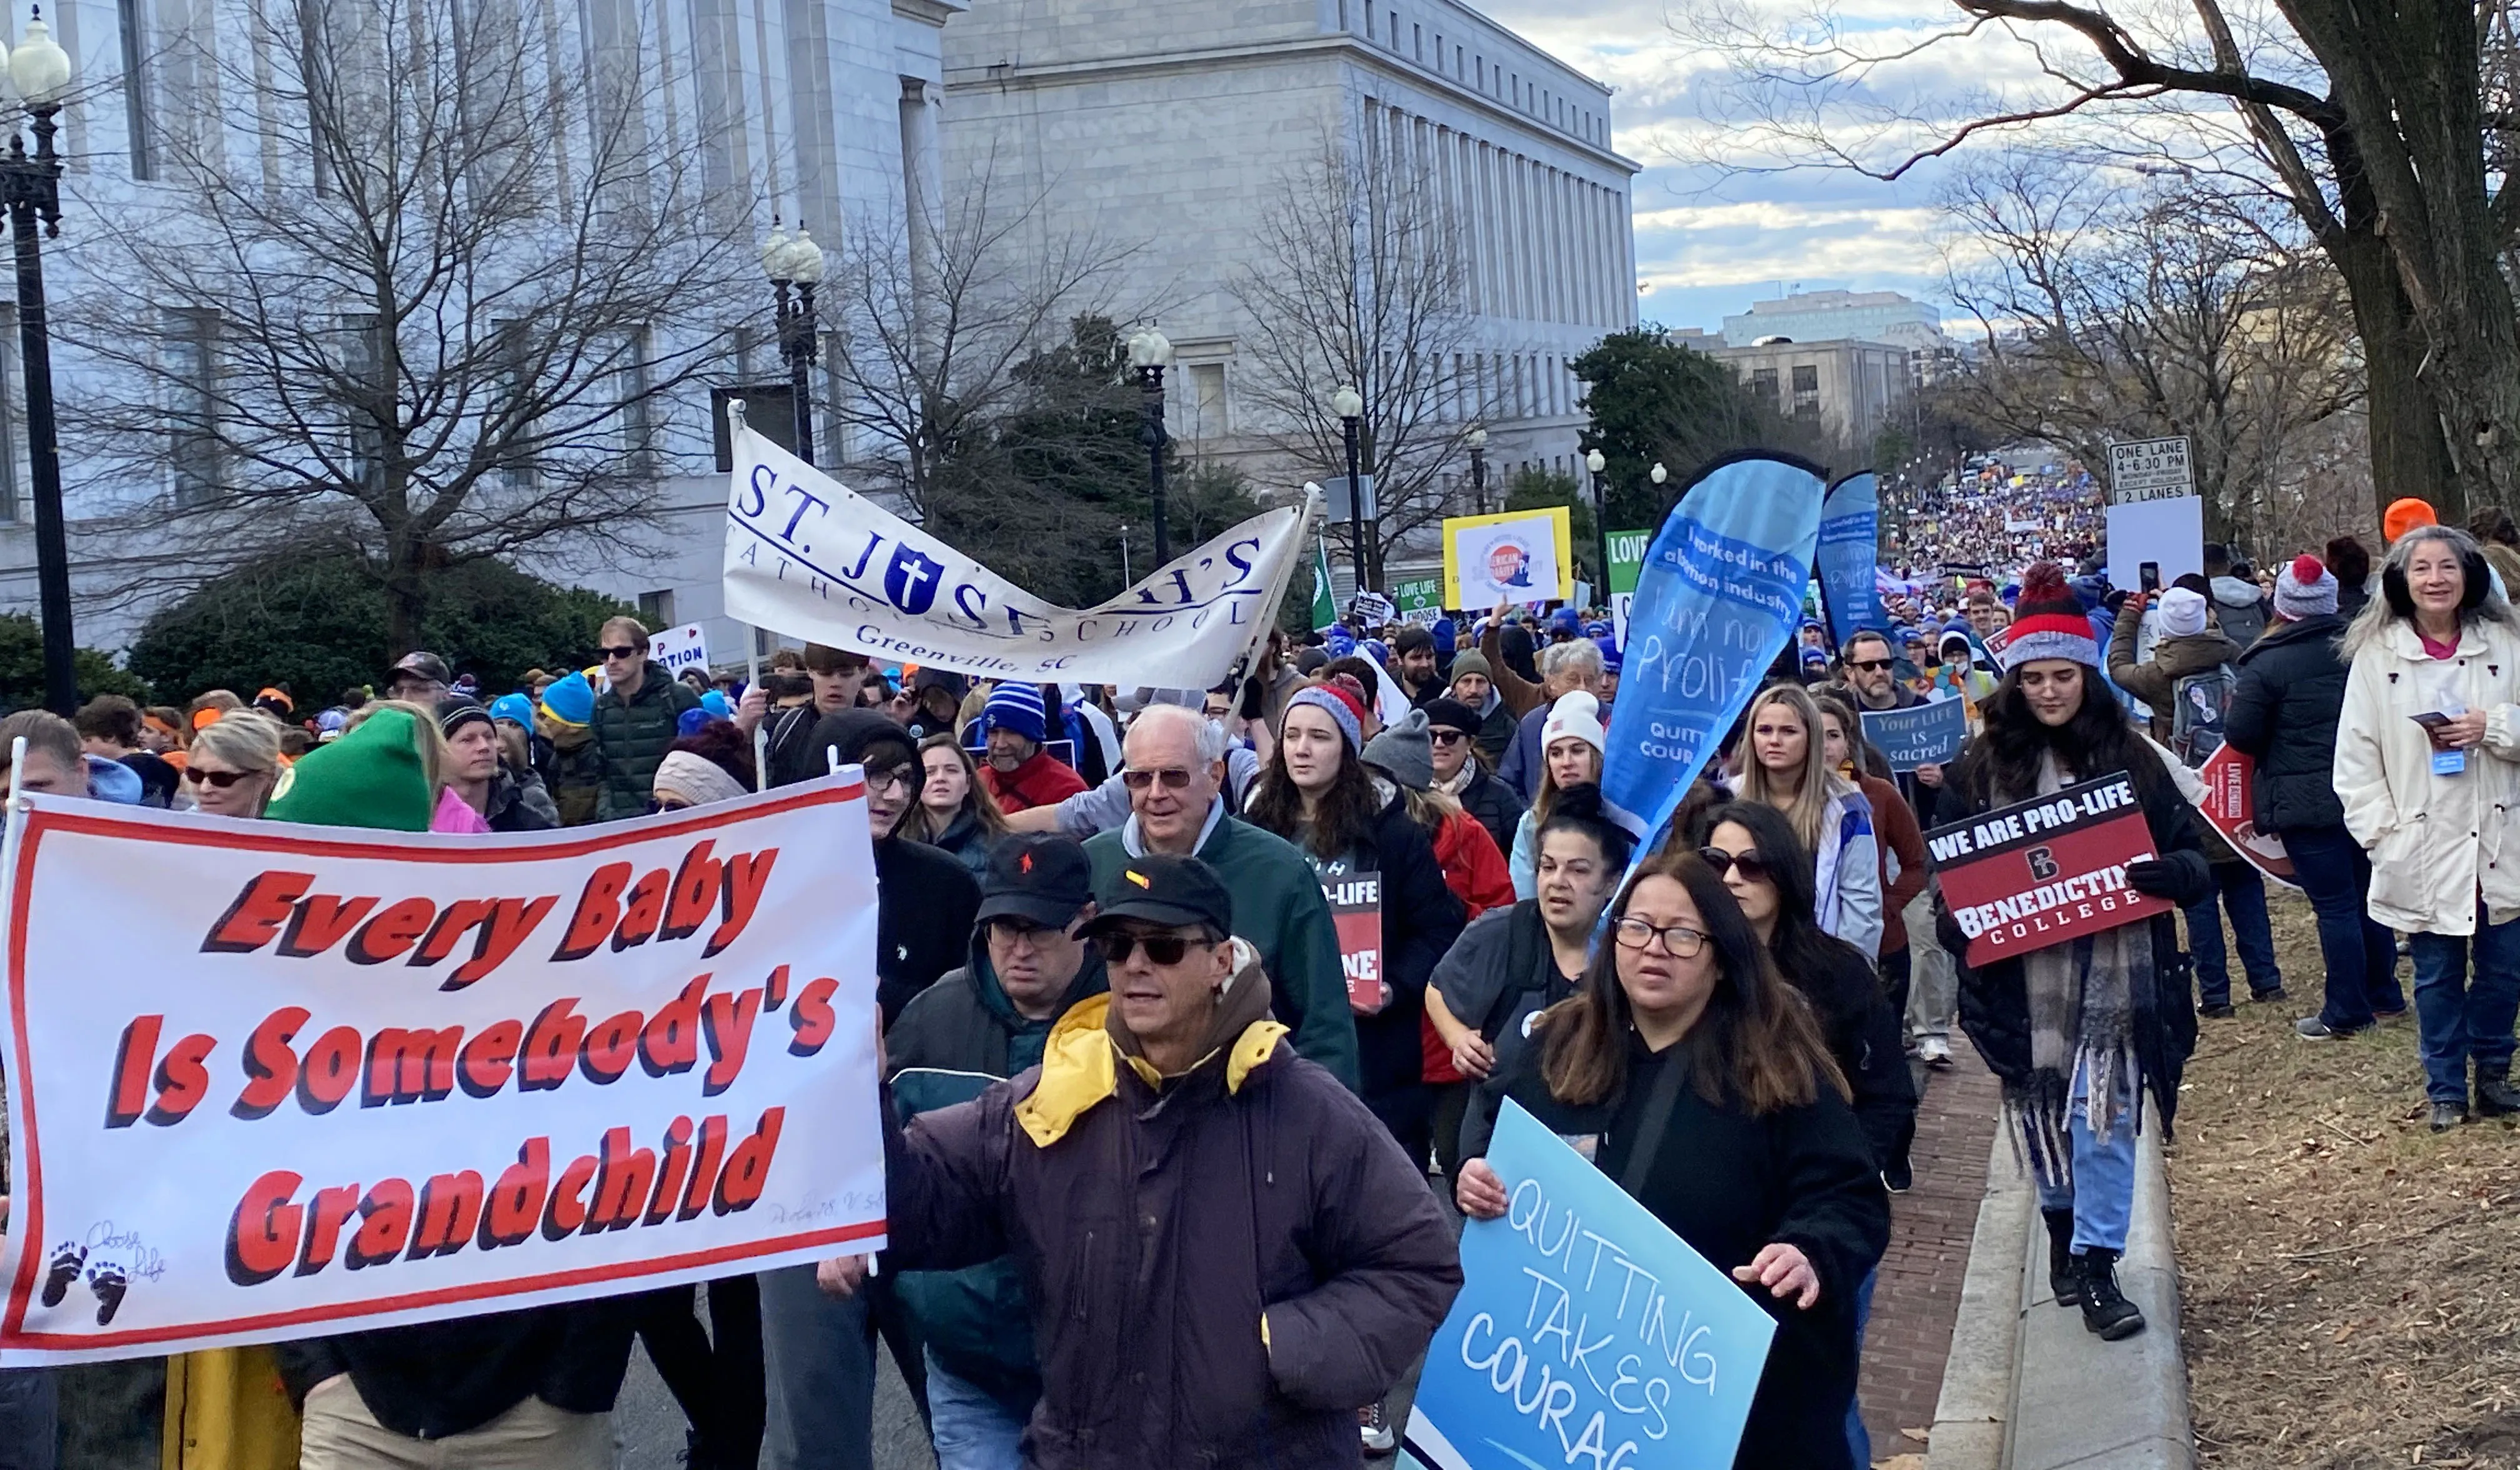 Pro-life marchers carry a banner reading “Every baby is somebody’s grandchild” at the March for Life in Washington, D.C., on Jan. 20, 2023.?w=200&h=150